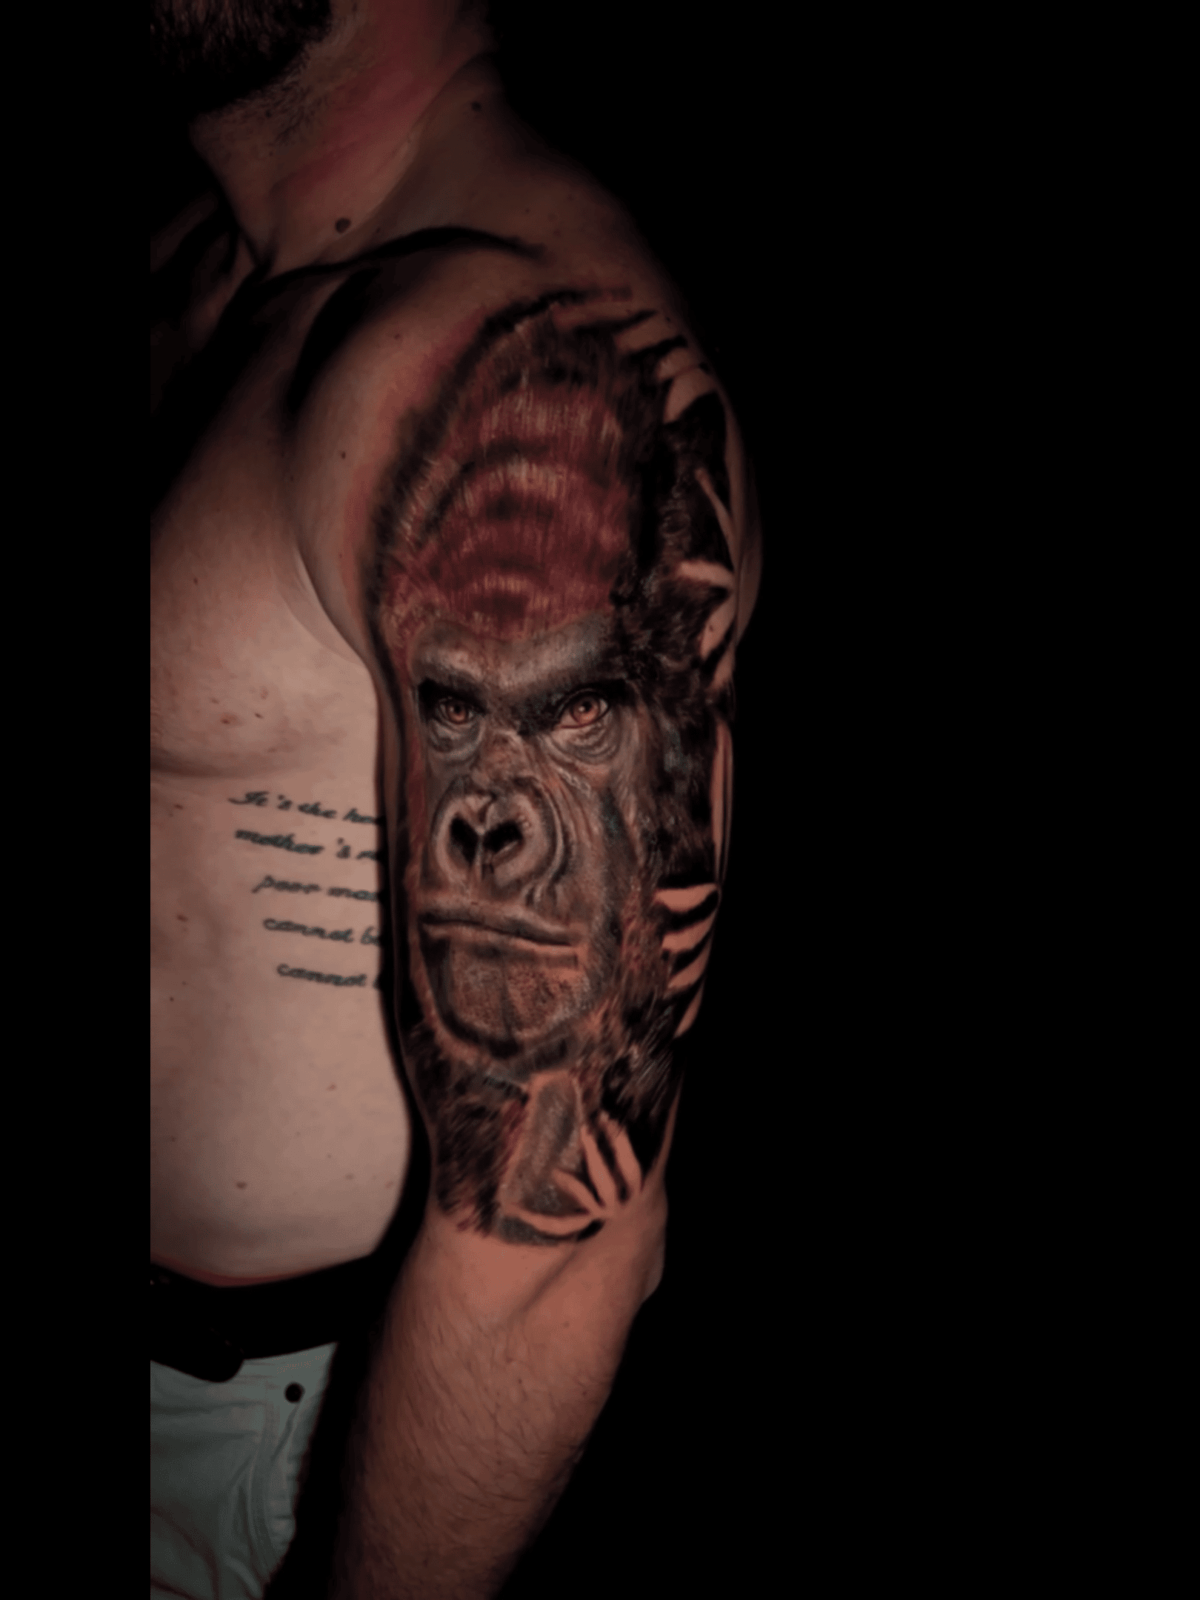 Gorilla cover up done by... - Heartless Vandals Tattoo Lounge | Facebook